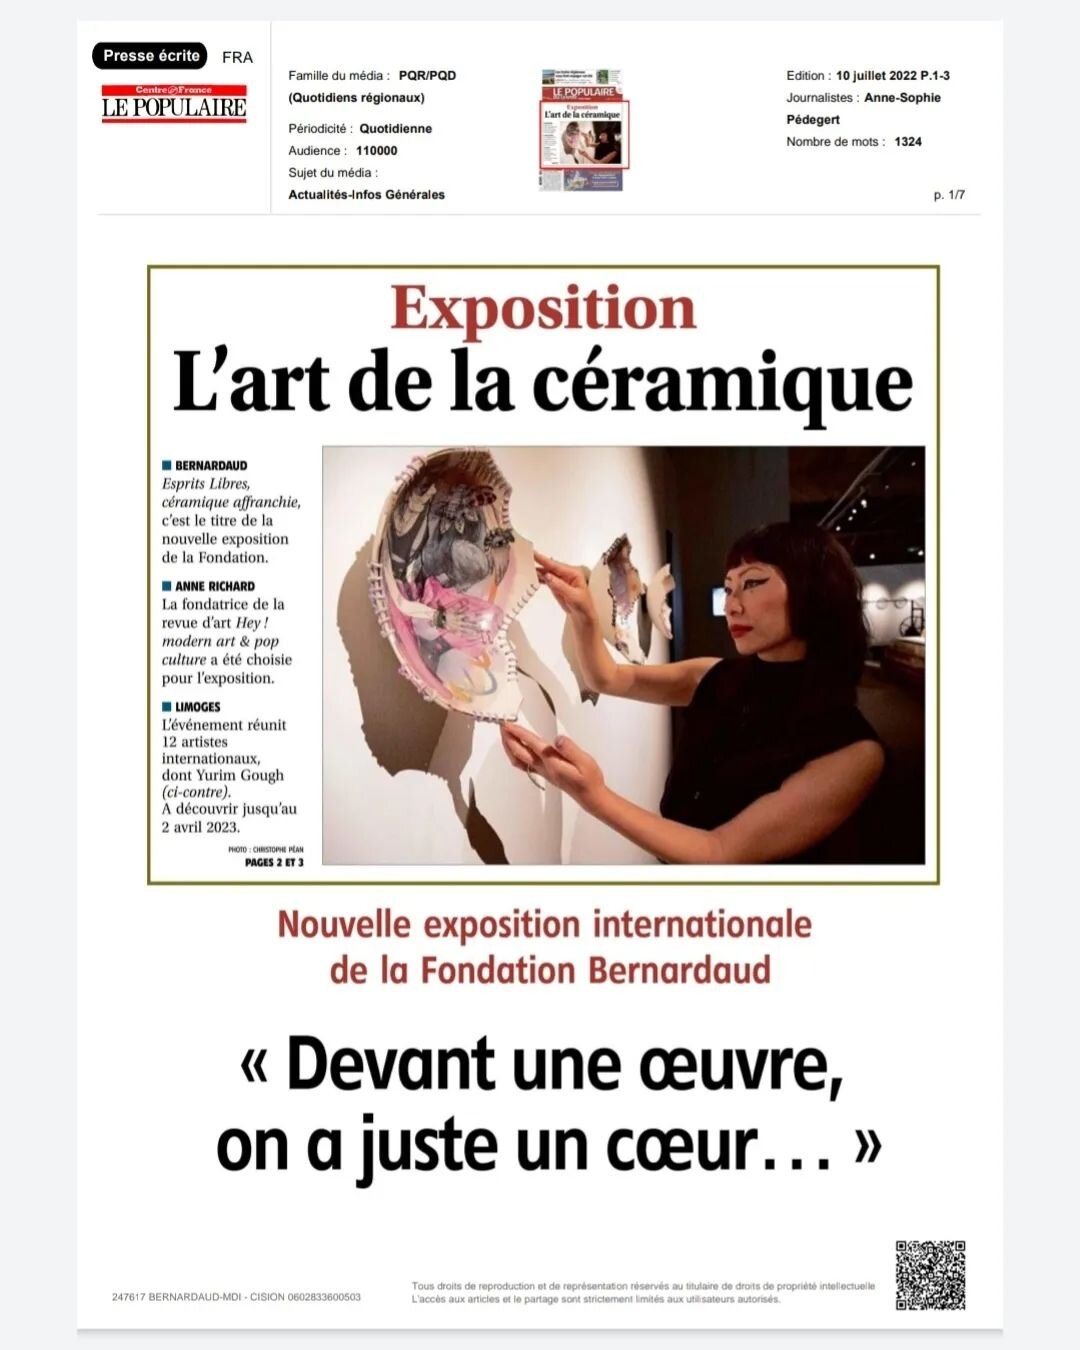 📄🔺️French press🔺️ 📄

Thanks for the article Le Populaire du Centre 🙏❤️&zwj;🔥

&lsquo;Espirit Libres&rsquo;
at @fondationbernardaud&nbsp; 

27th June -2nd April 2023 
Curated by @heyheyheyteam Anne Richard. 

#genderfluidproject 
#themself
#cera